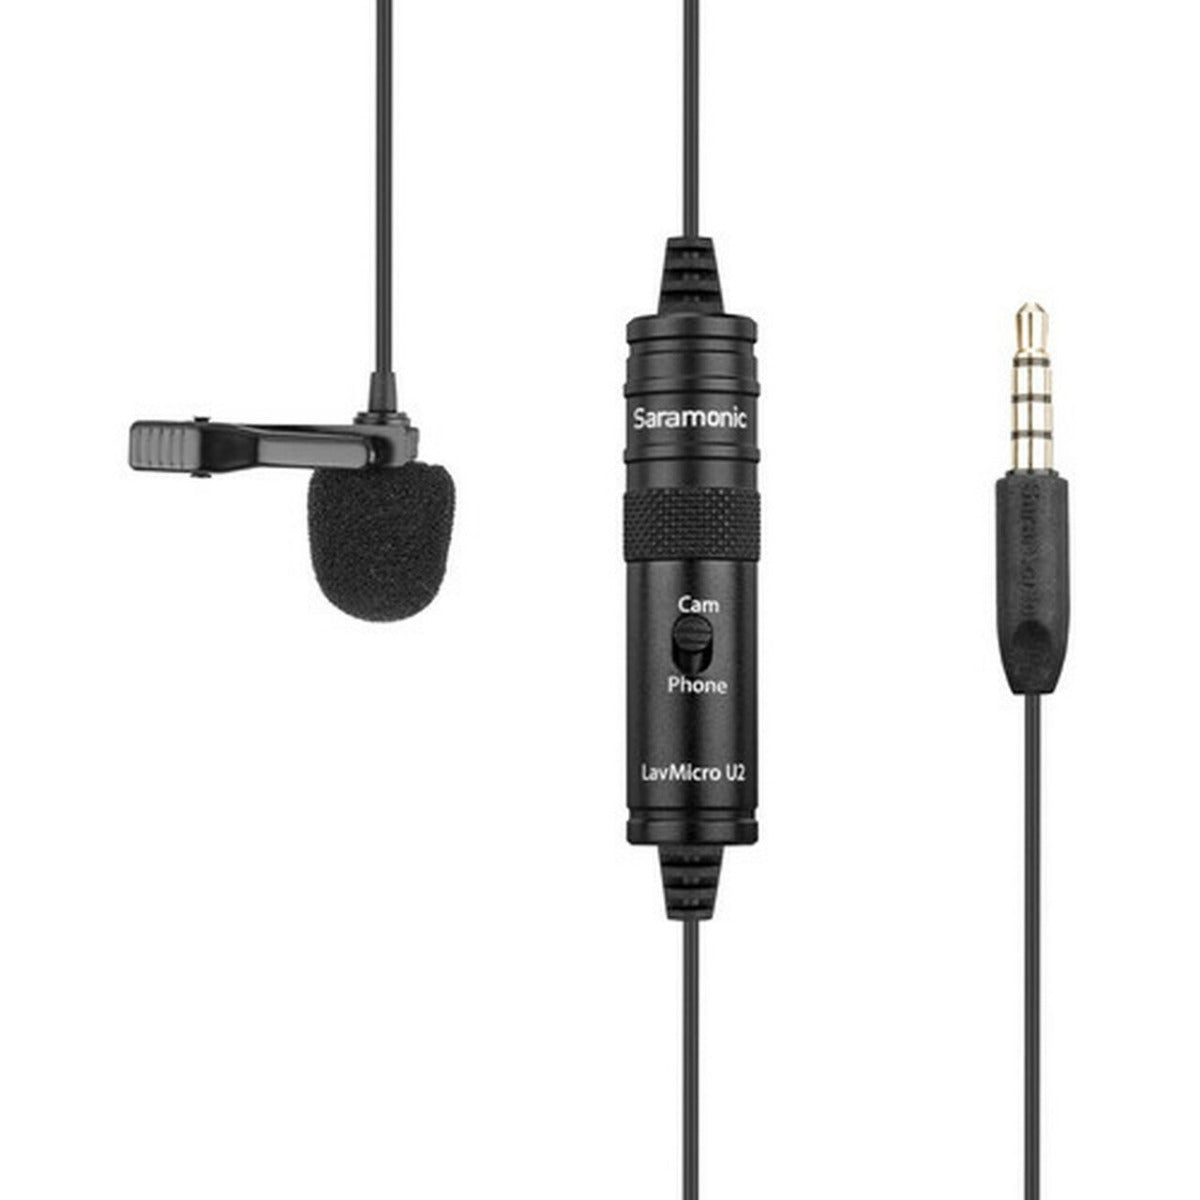 Product Image of Saramonic LavMicro U2 Ultracompact Clip-On Lavalier Microphone